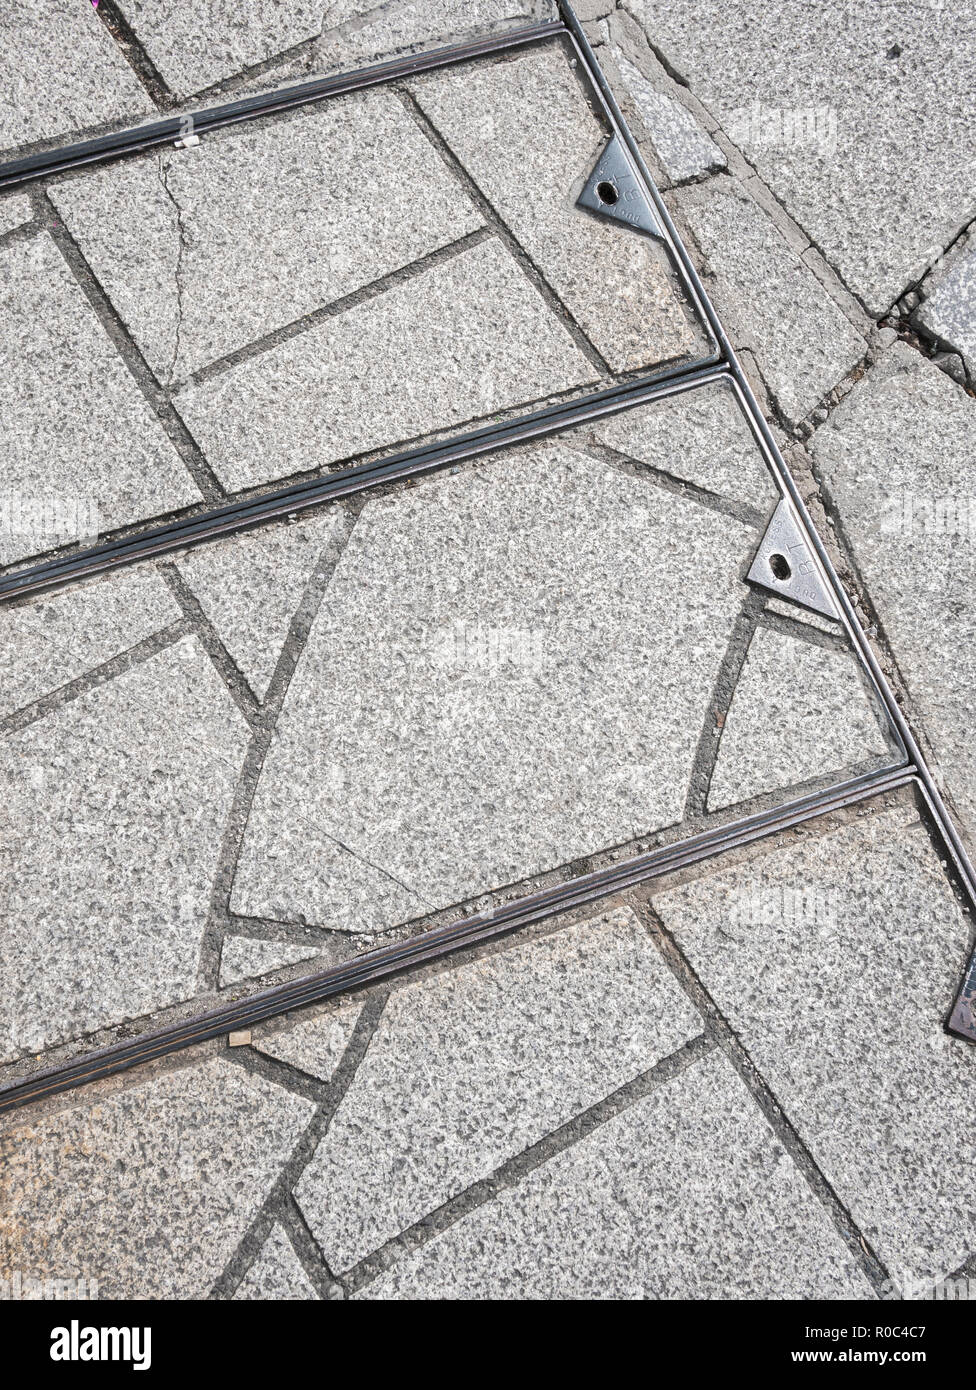 Section of paving in St. Austell, Cornwall, where slabs have been cut into sections to fit awkward angles. Stock Photo